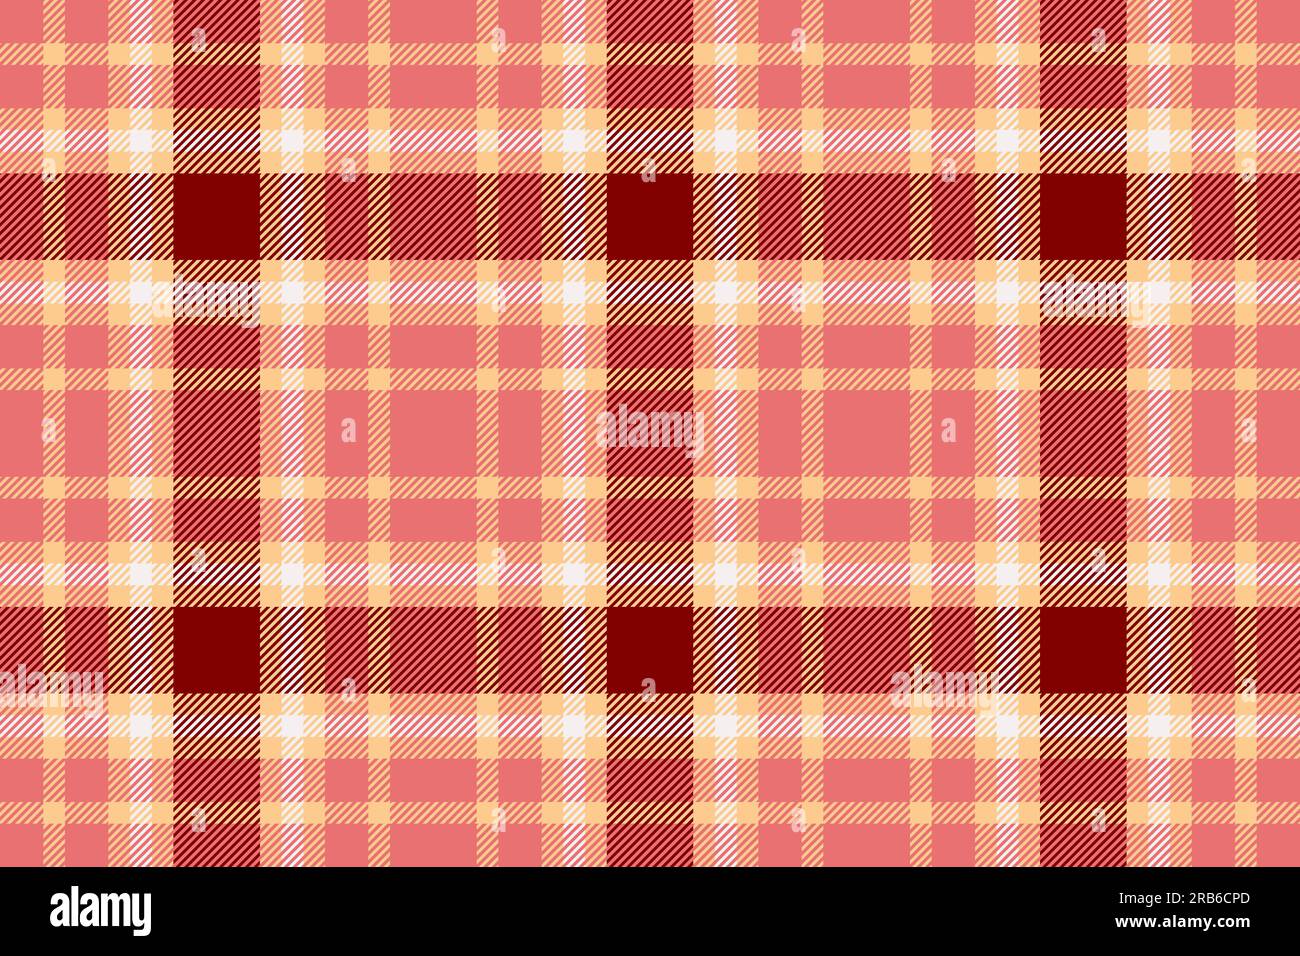 Plaid tartan background of vector textile texture with a pattern seamless fabric check in red and orange colors. Stock Vector